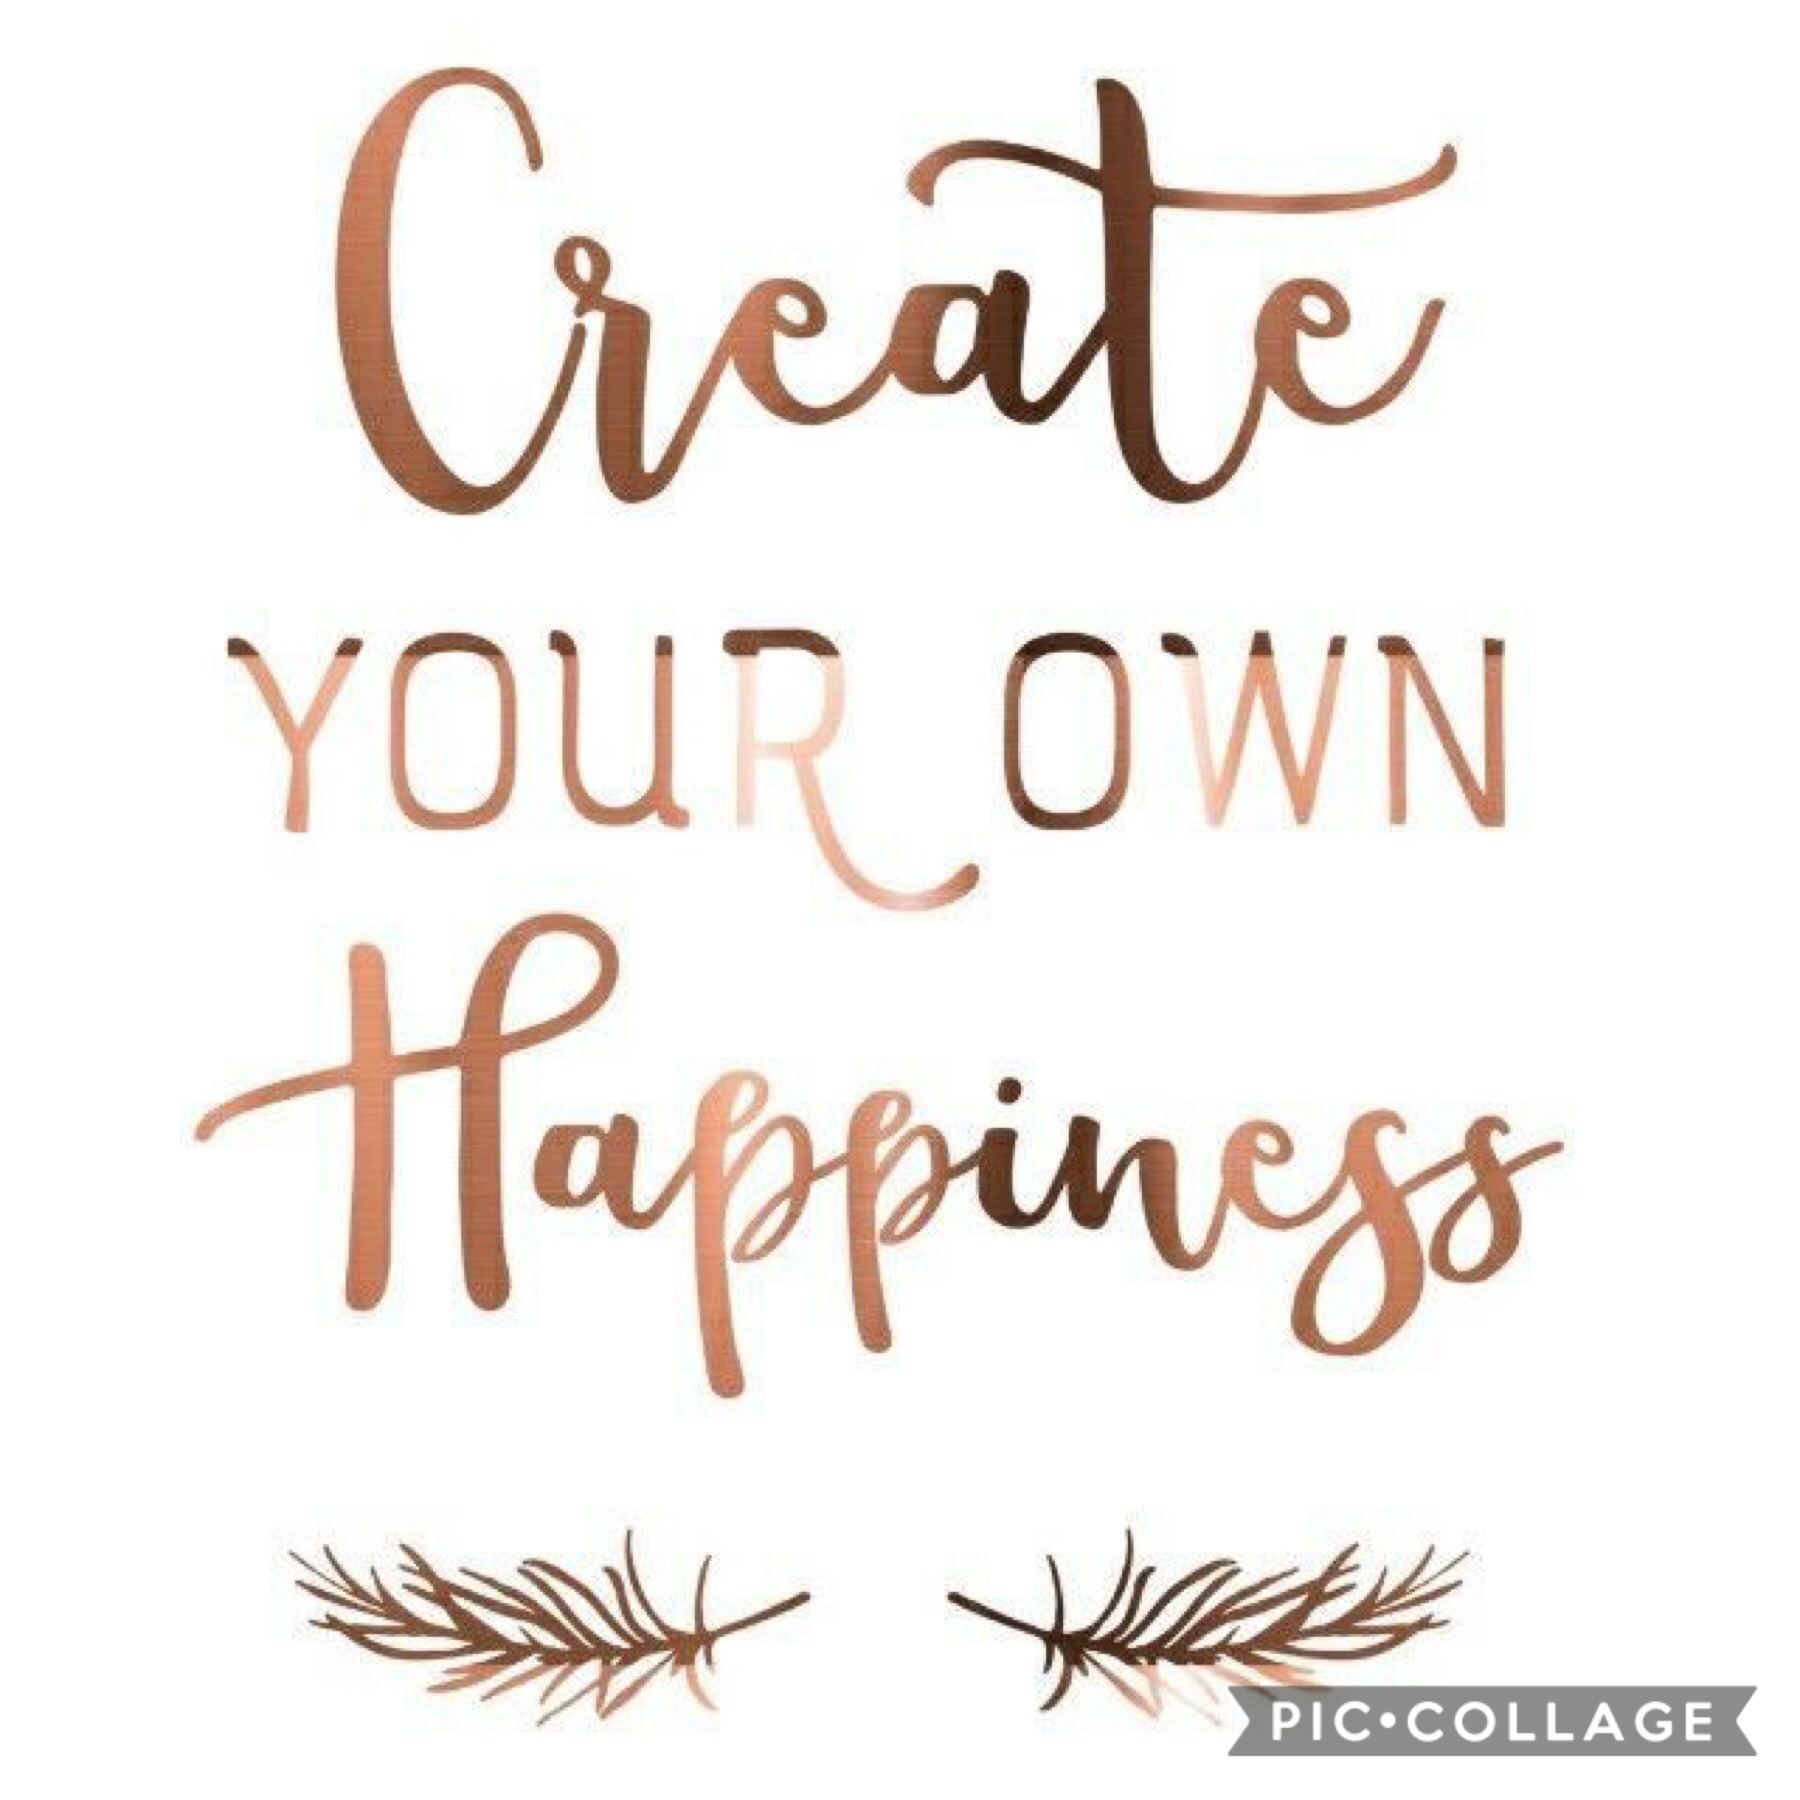 Create your own happiness.🙂🙂🙂